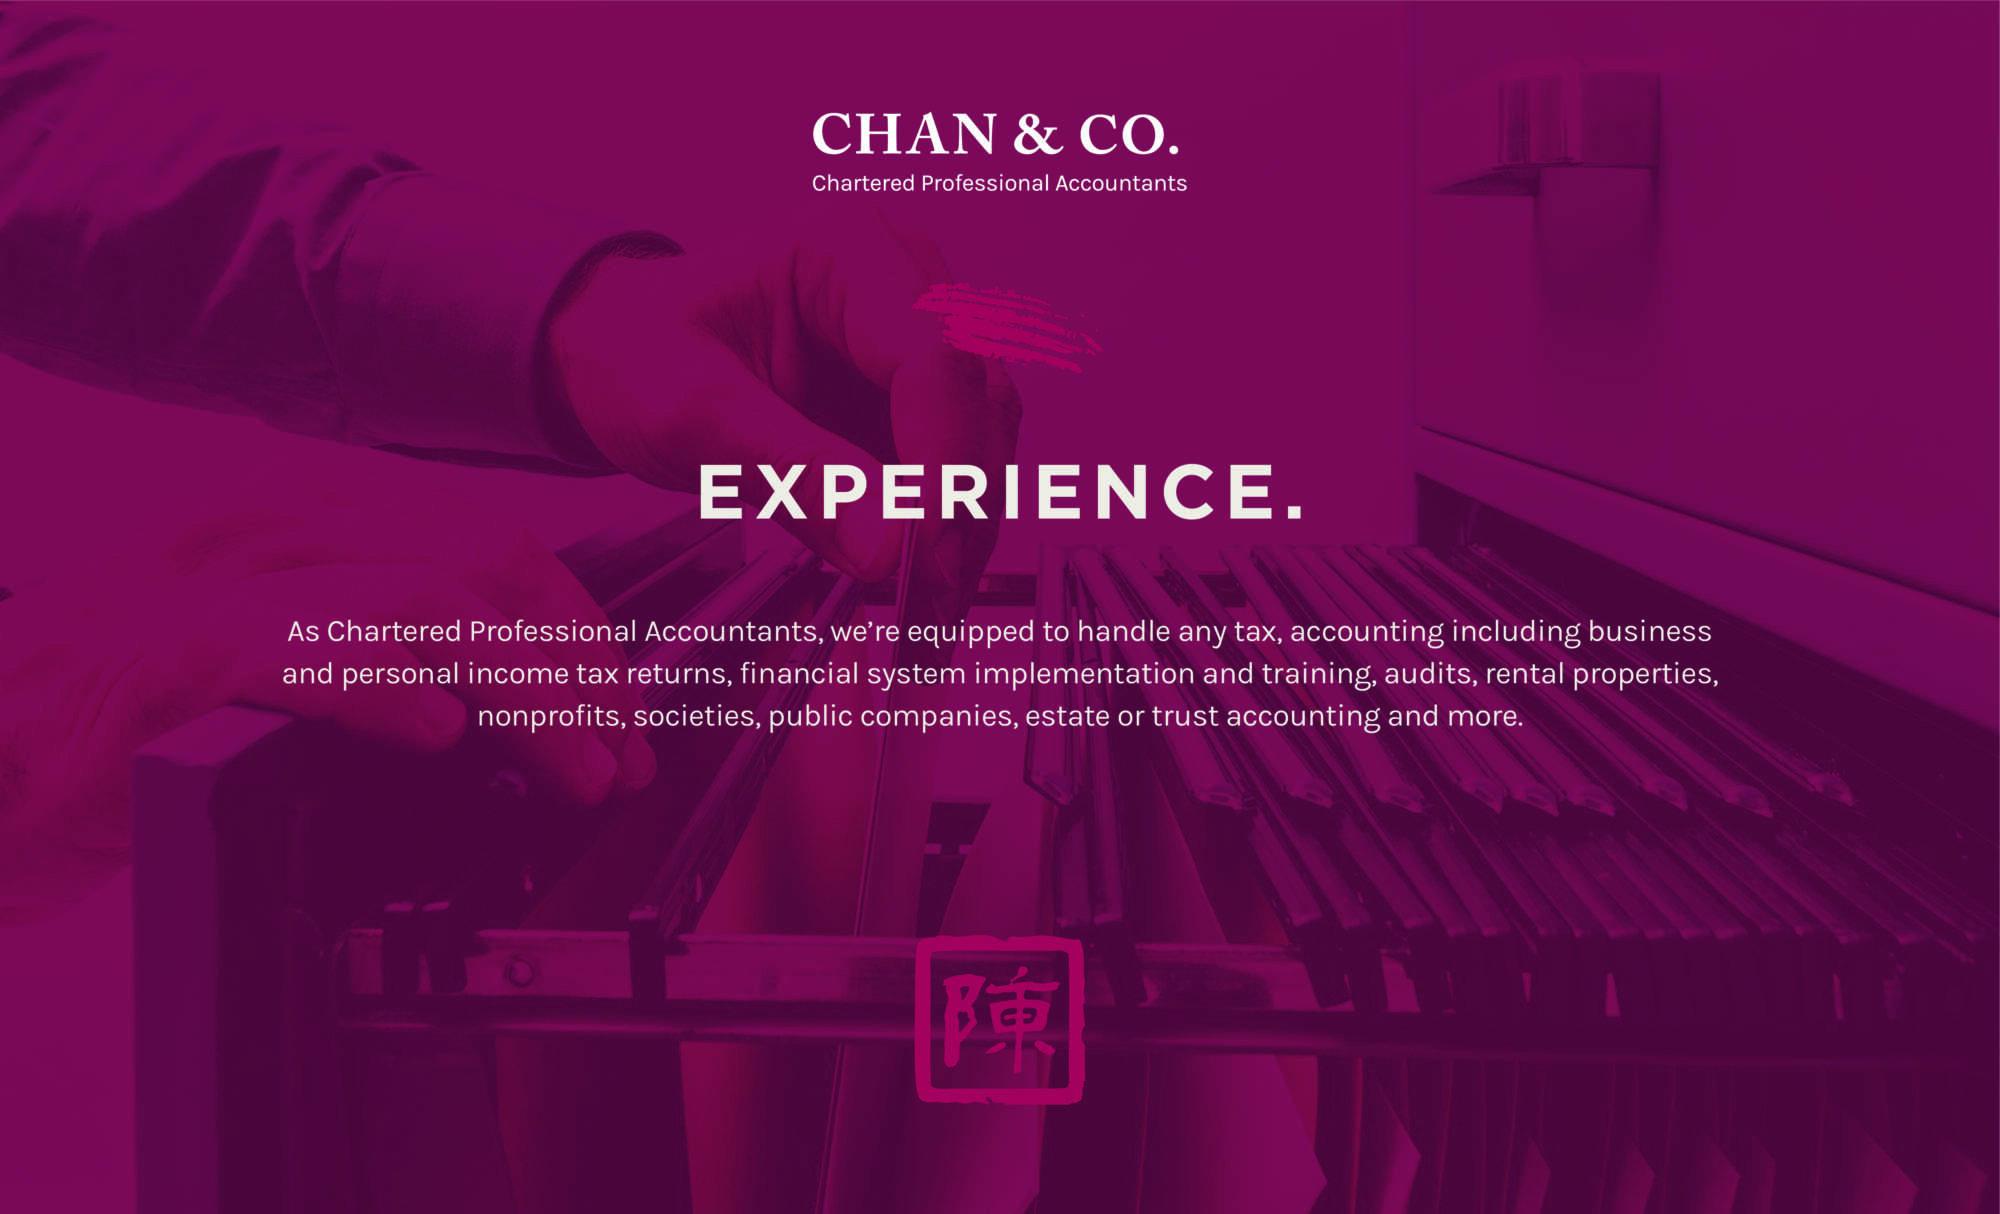 Chan & Co - Experience